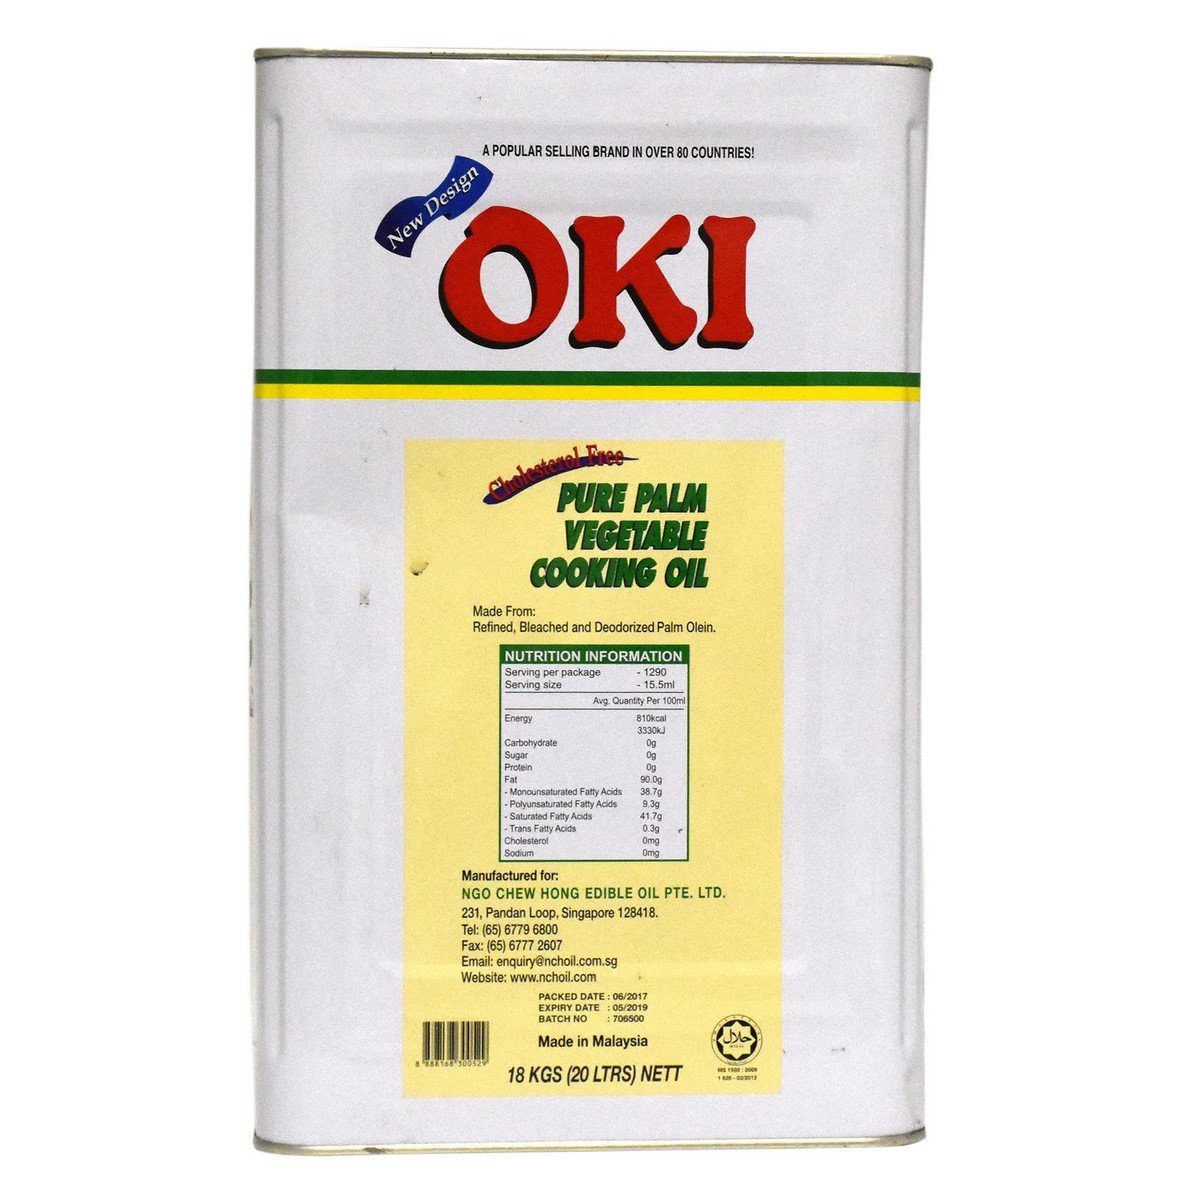 OKI Pure Palm Vegetable Cooking Oil 20Litre